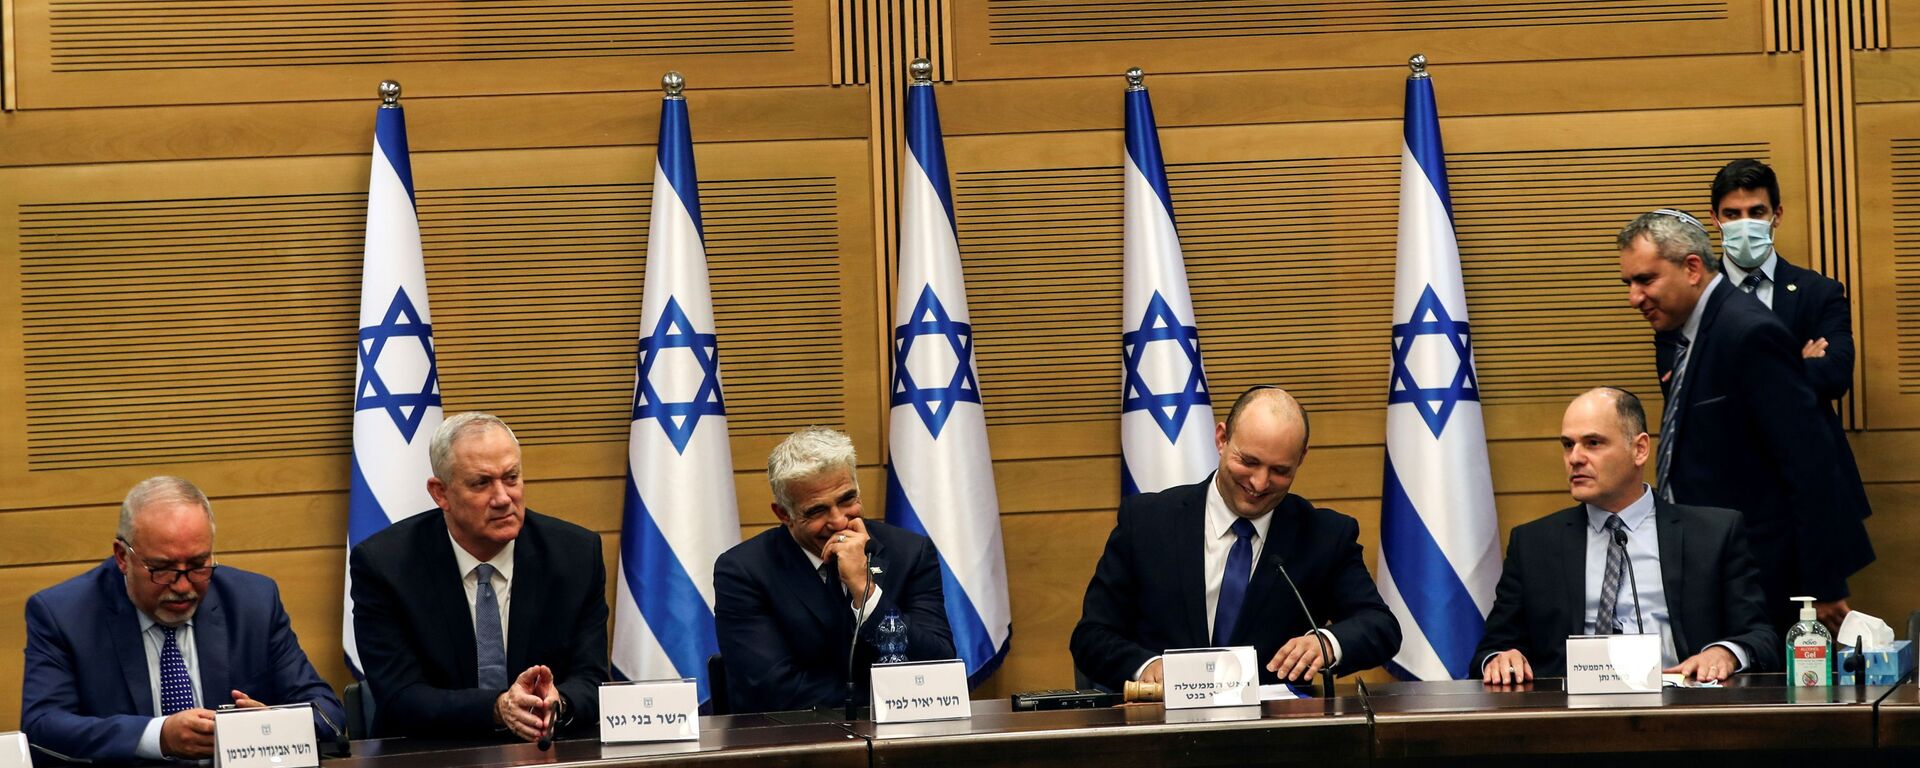 Israeli Prime Minister Naftali Bennett and some of his government attend its first cabinet meeting in the Knesset, Israel's parliament, in Jerusalem June 13, 2021. - Sputnik International, 1920, 14.06.2021